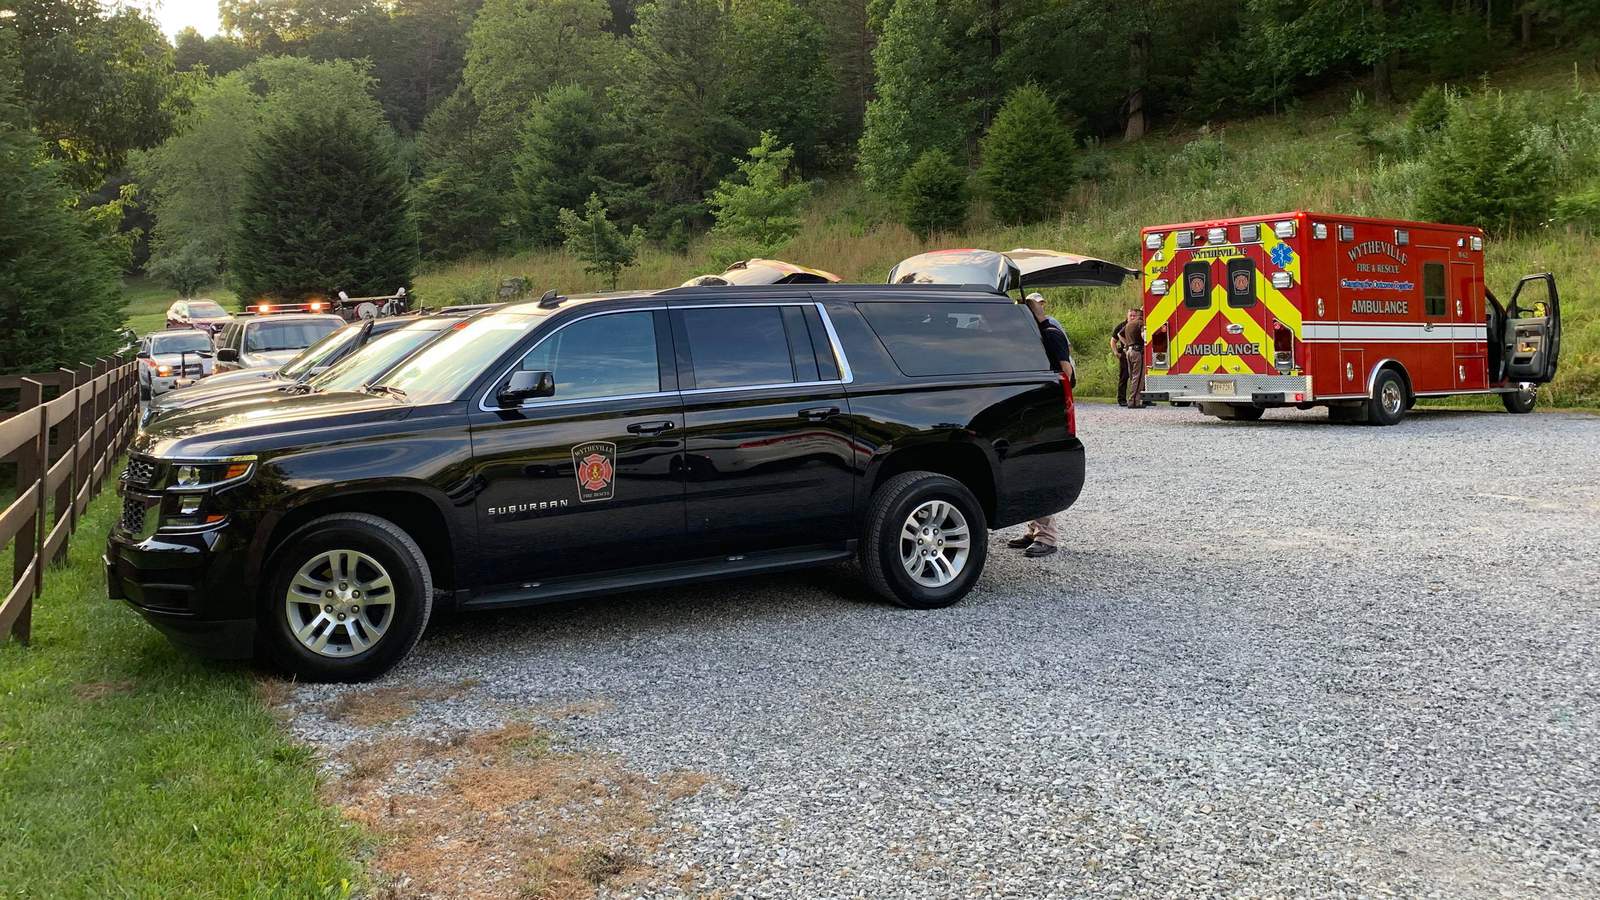 Crews rescue mother, two children, lost on Wytheville trail